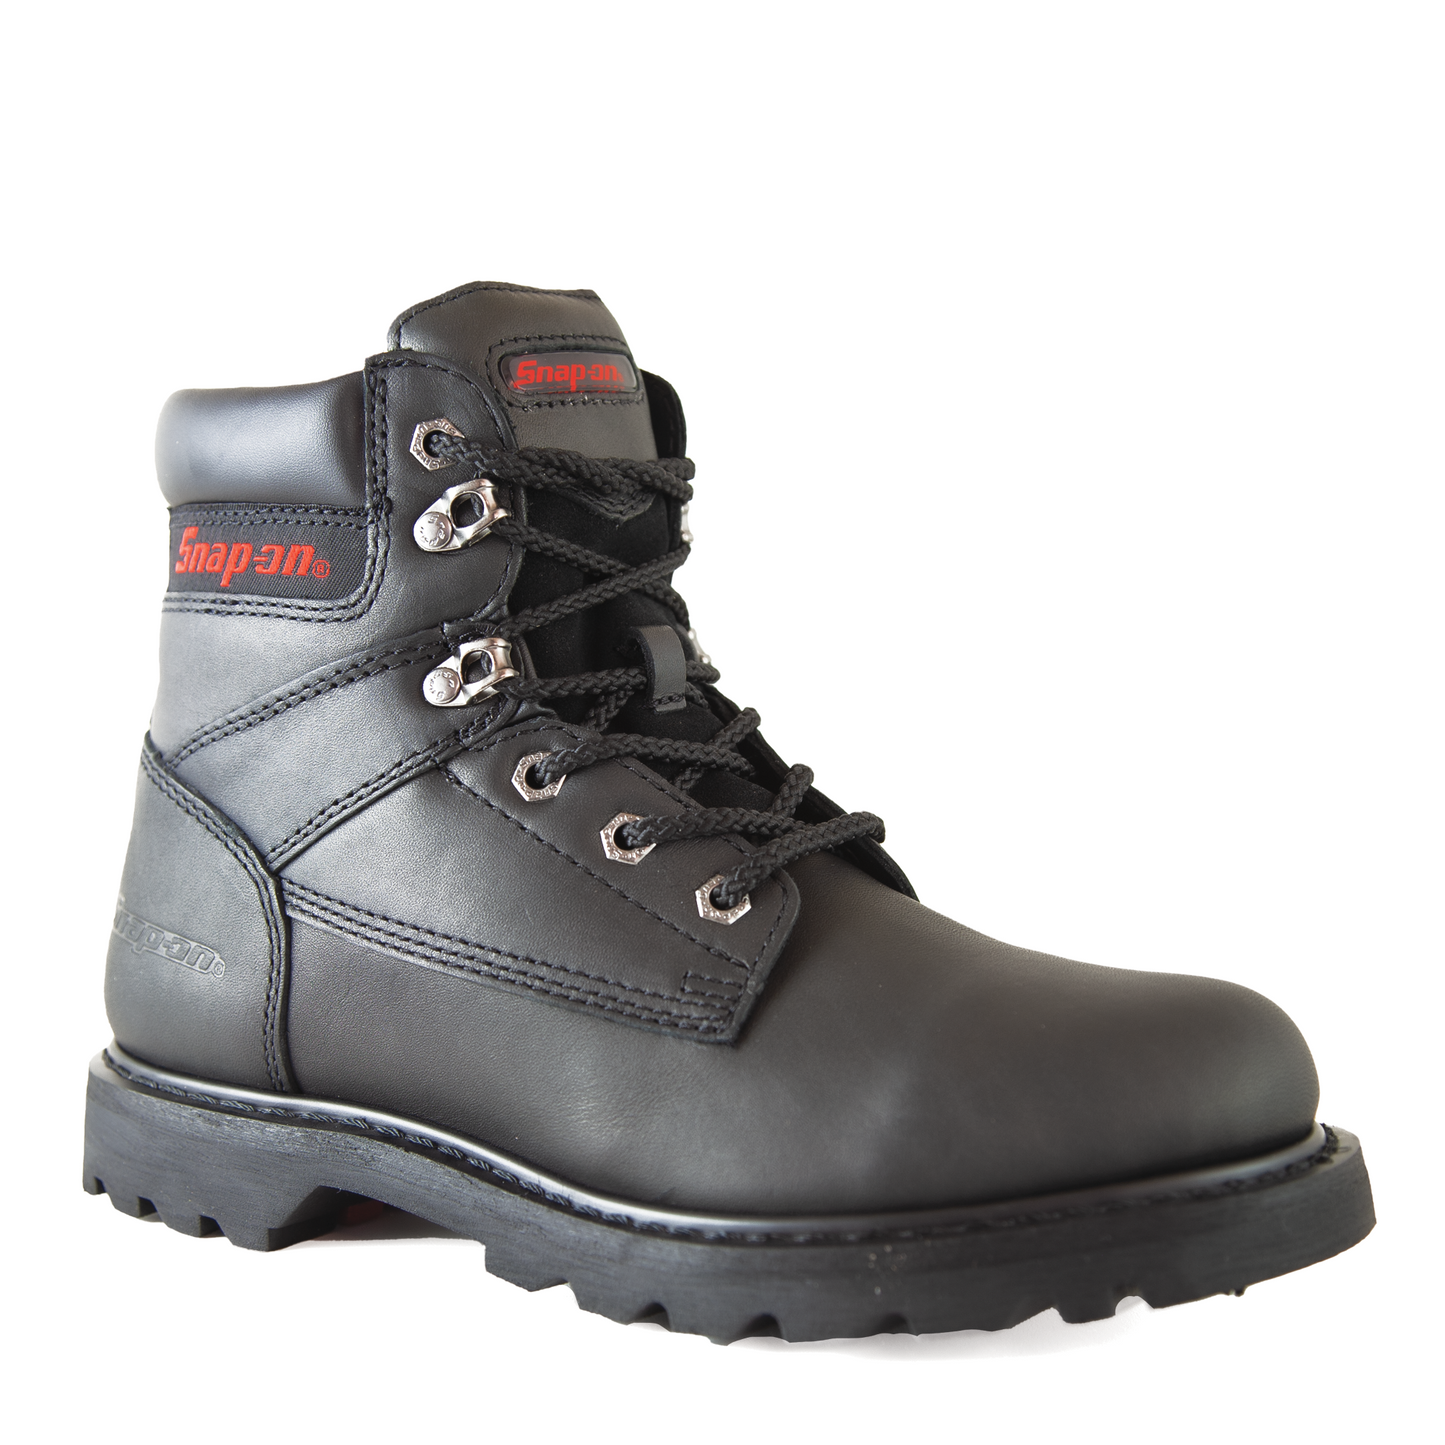 Snap-on Super V6, 6-Inch Work Boot